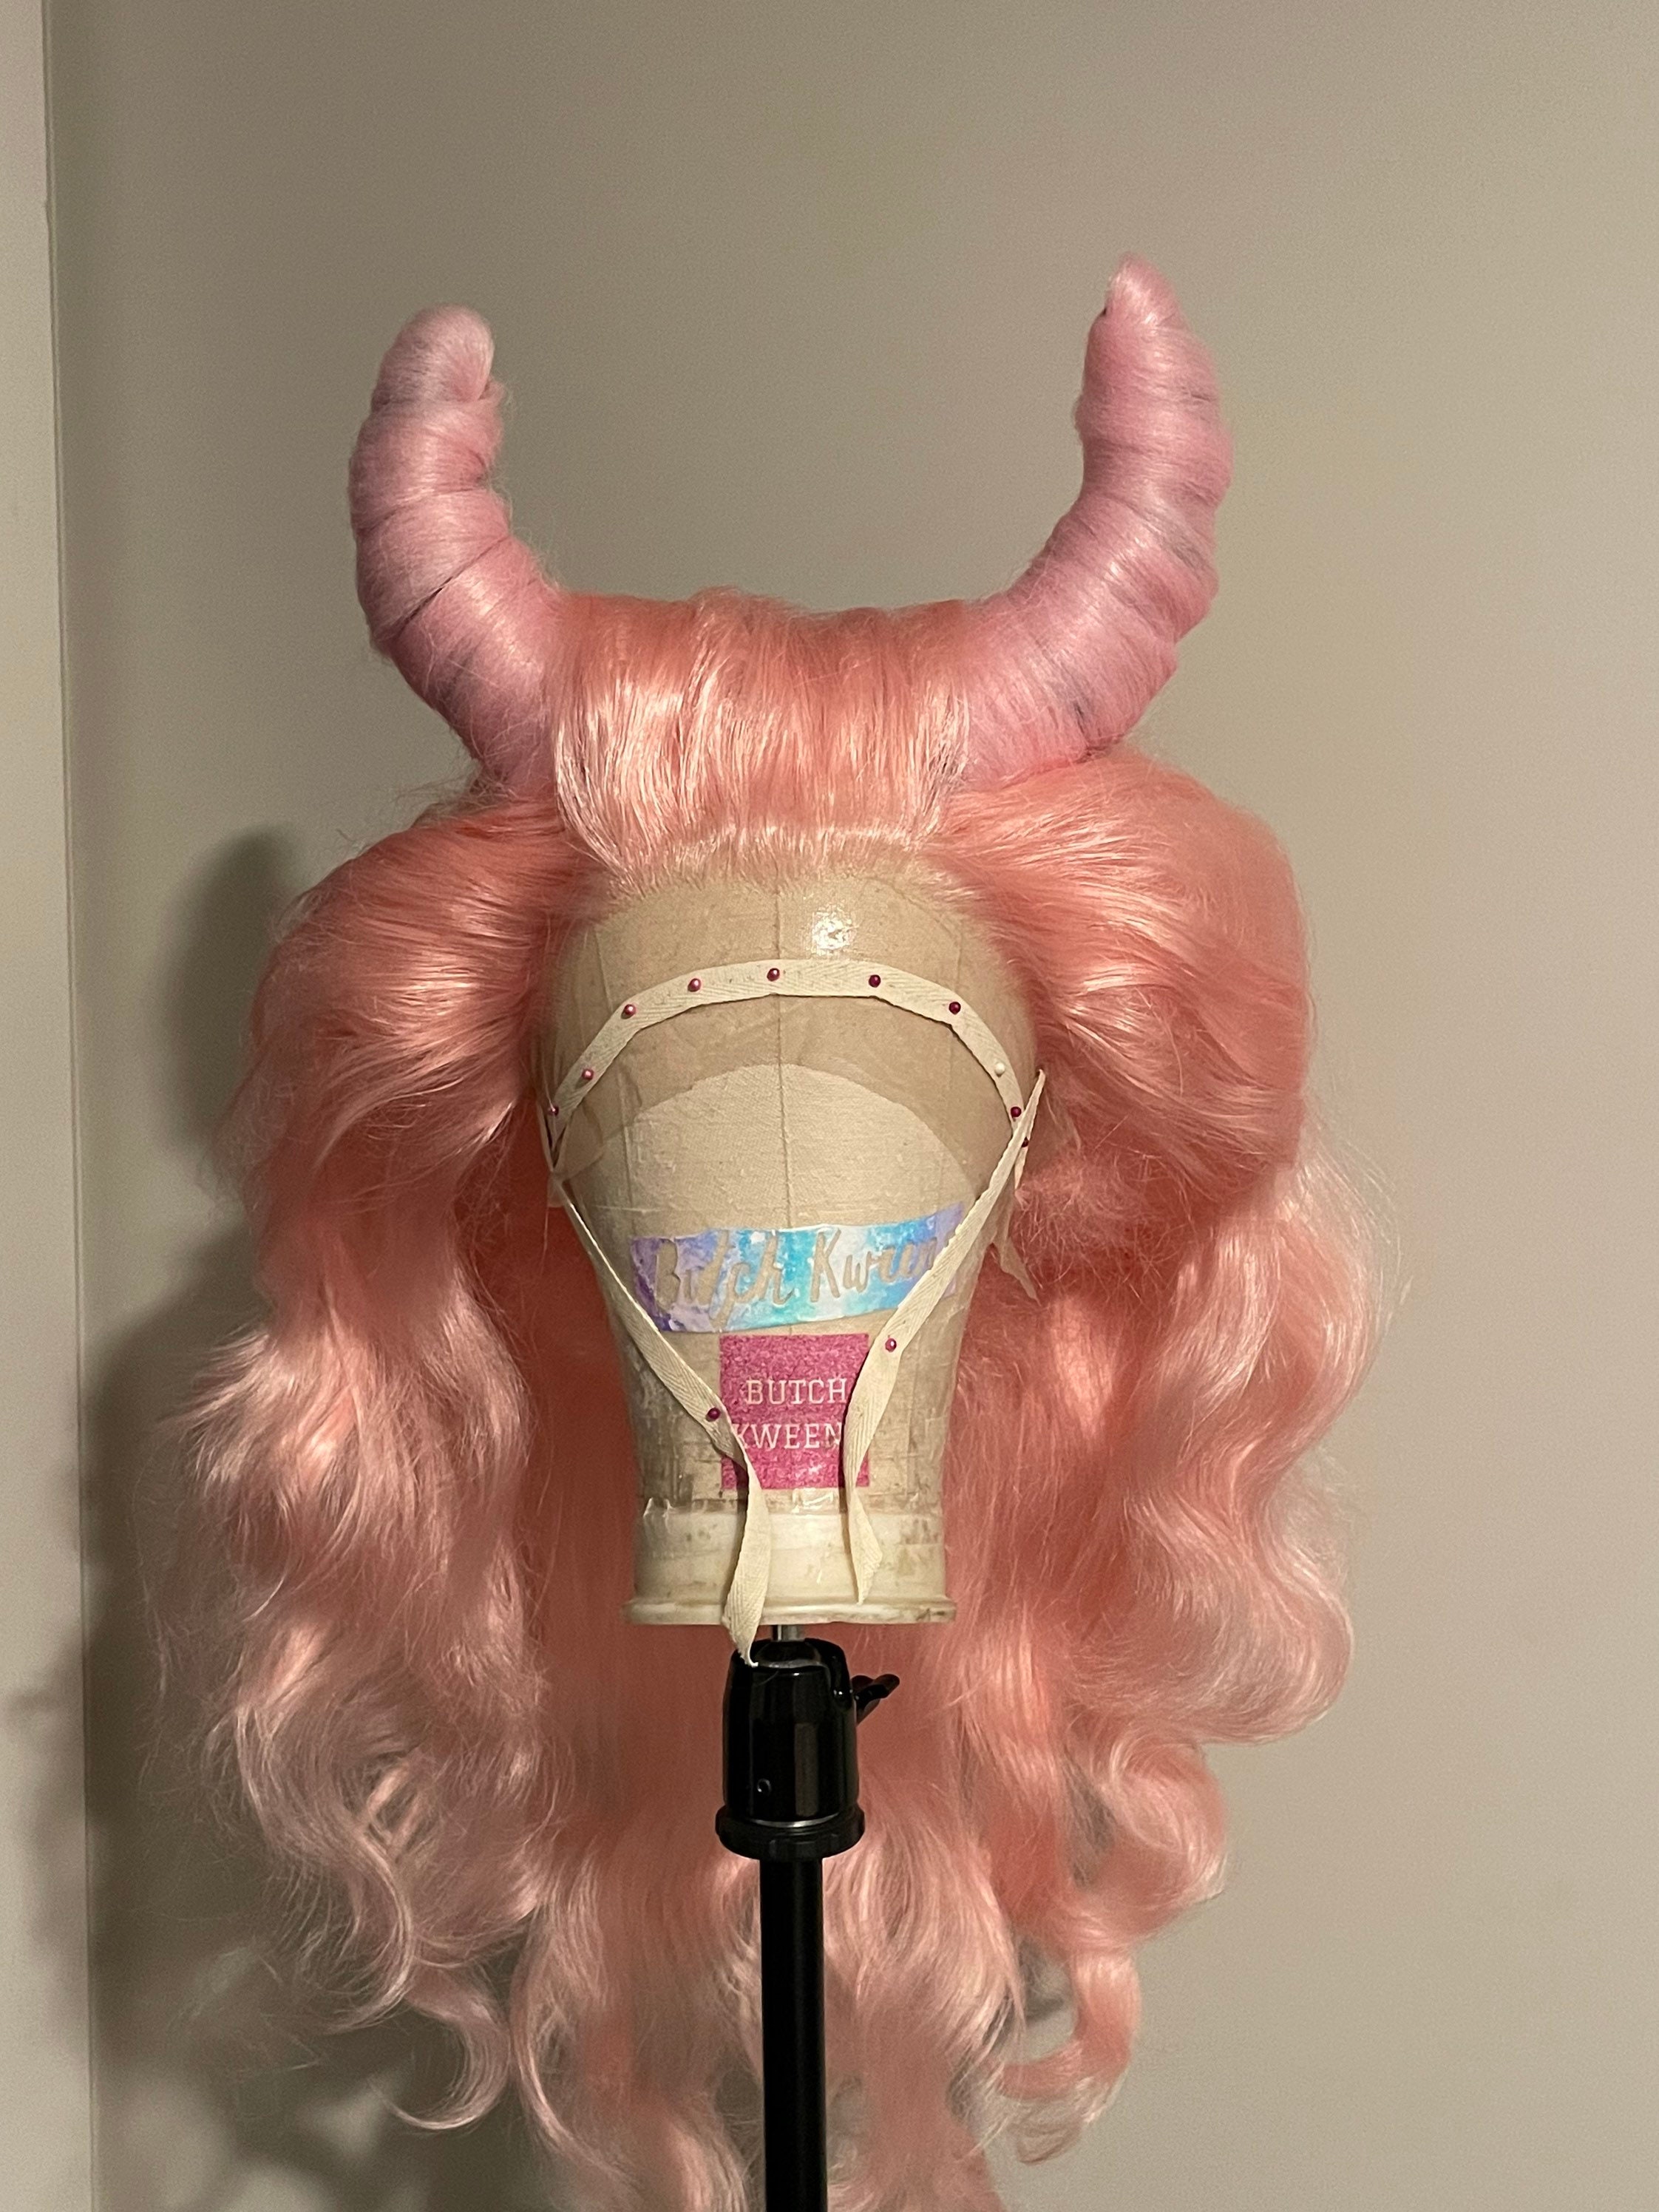 Wig styling tips? : r/Drag